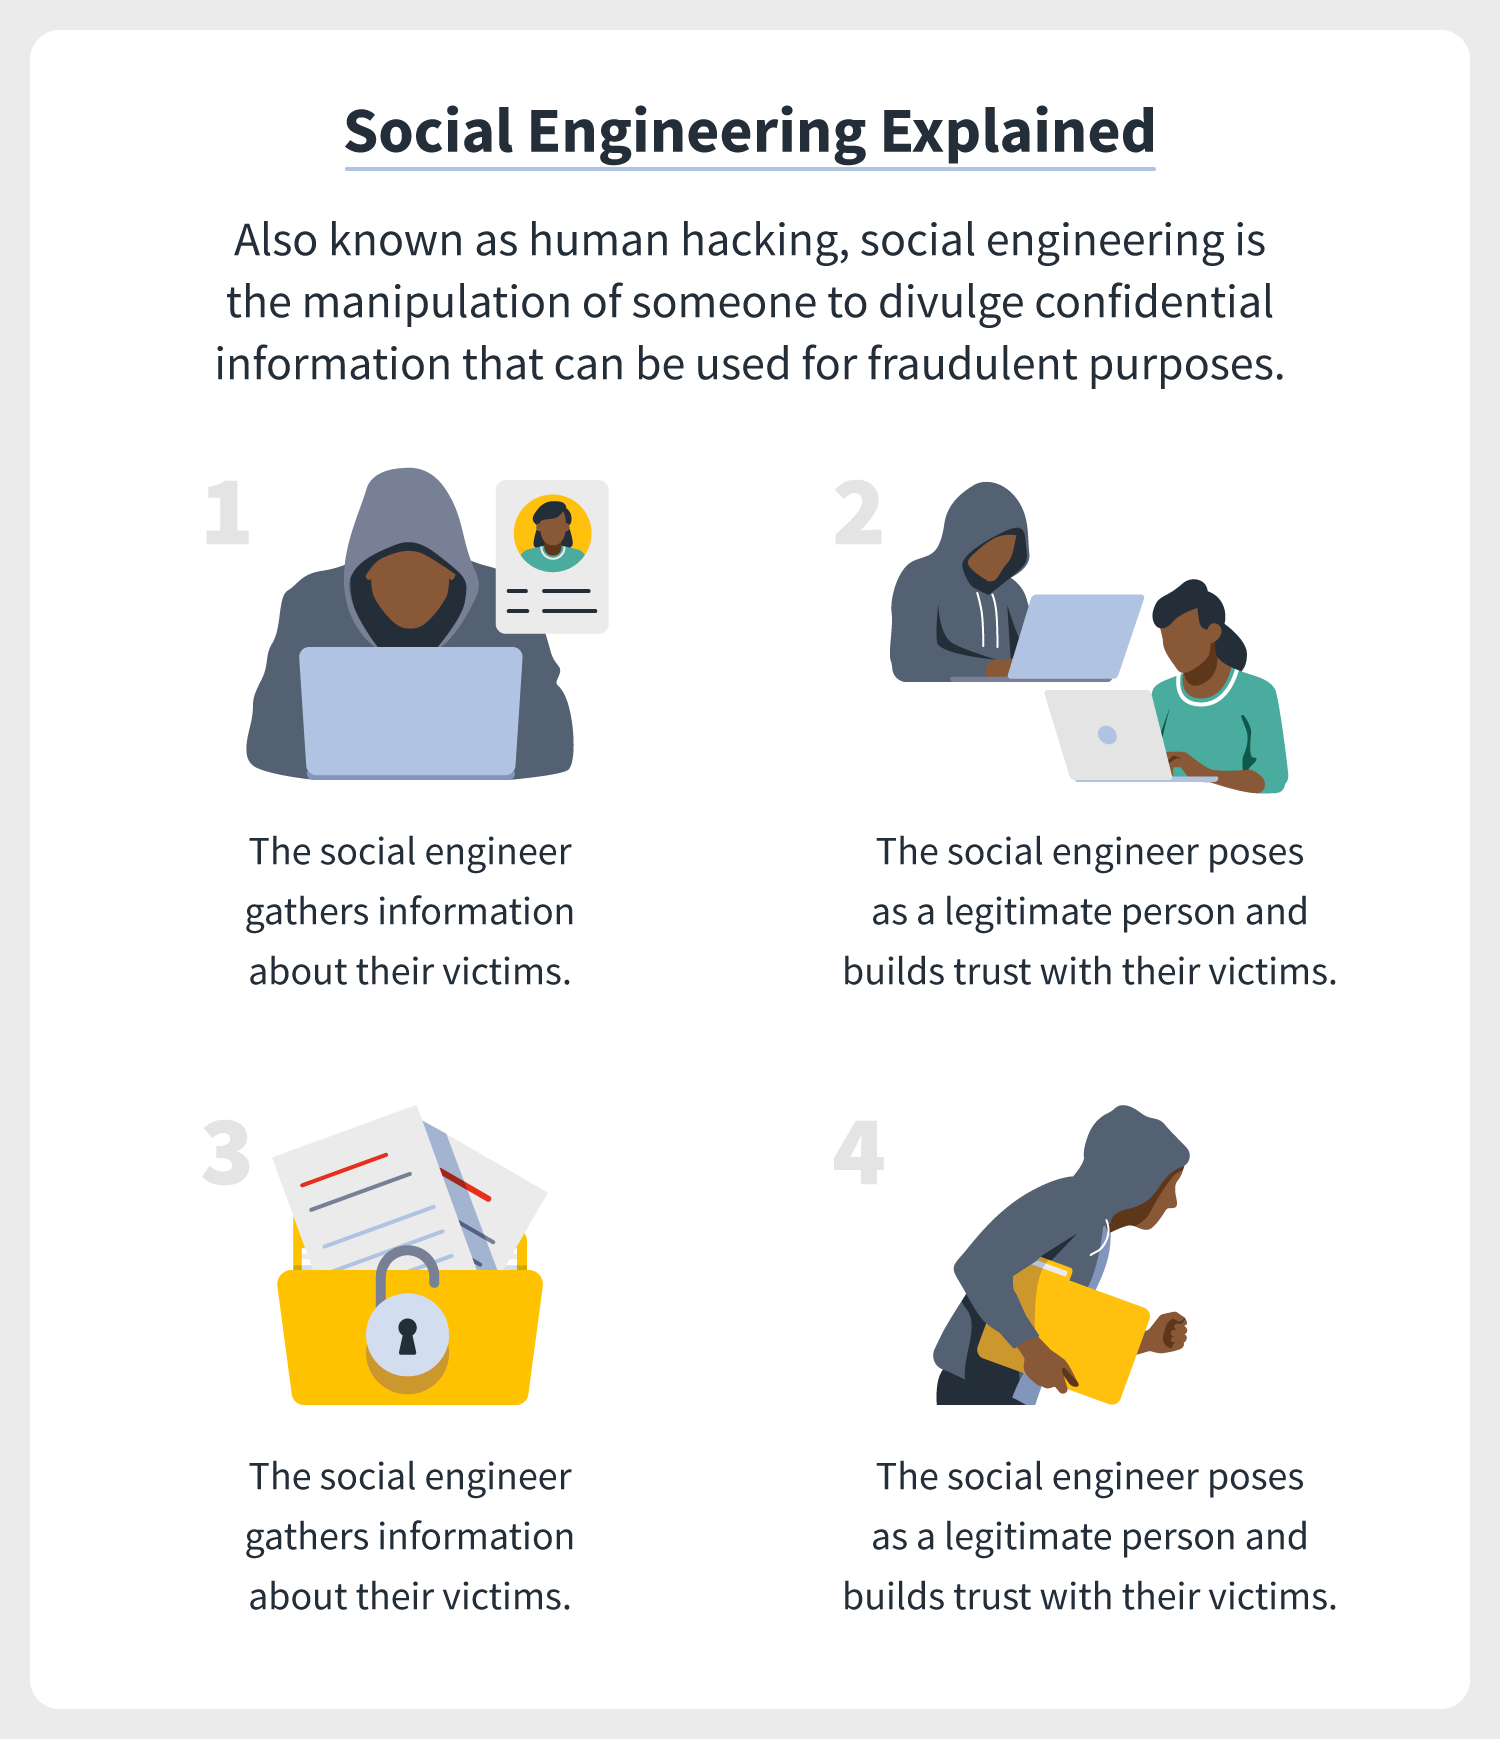 a social engineering definition and explanation of the concept in four steps